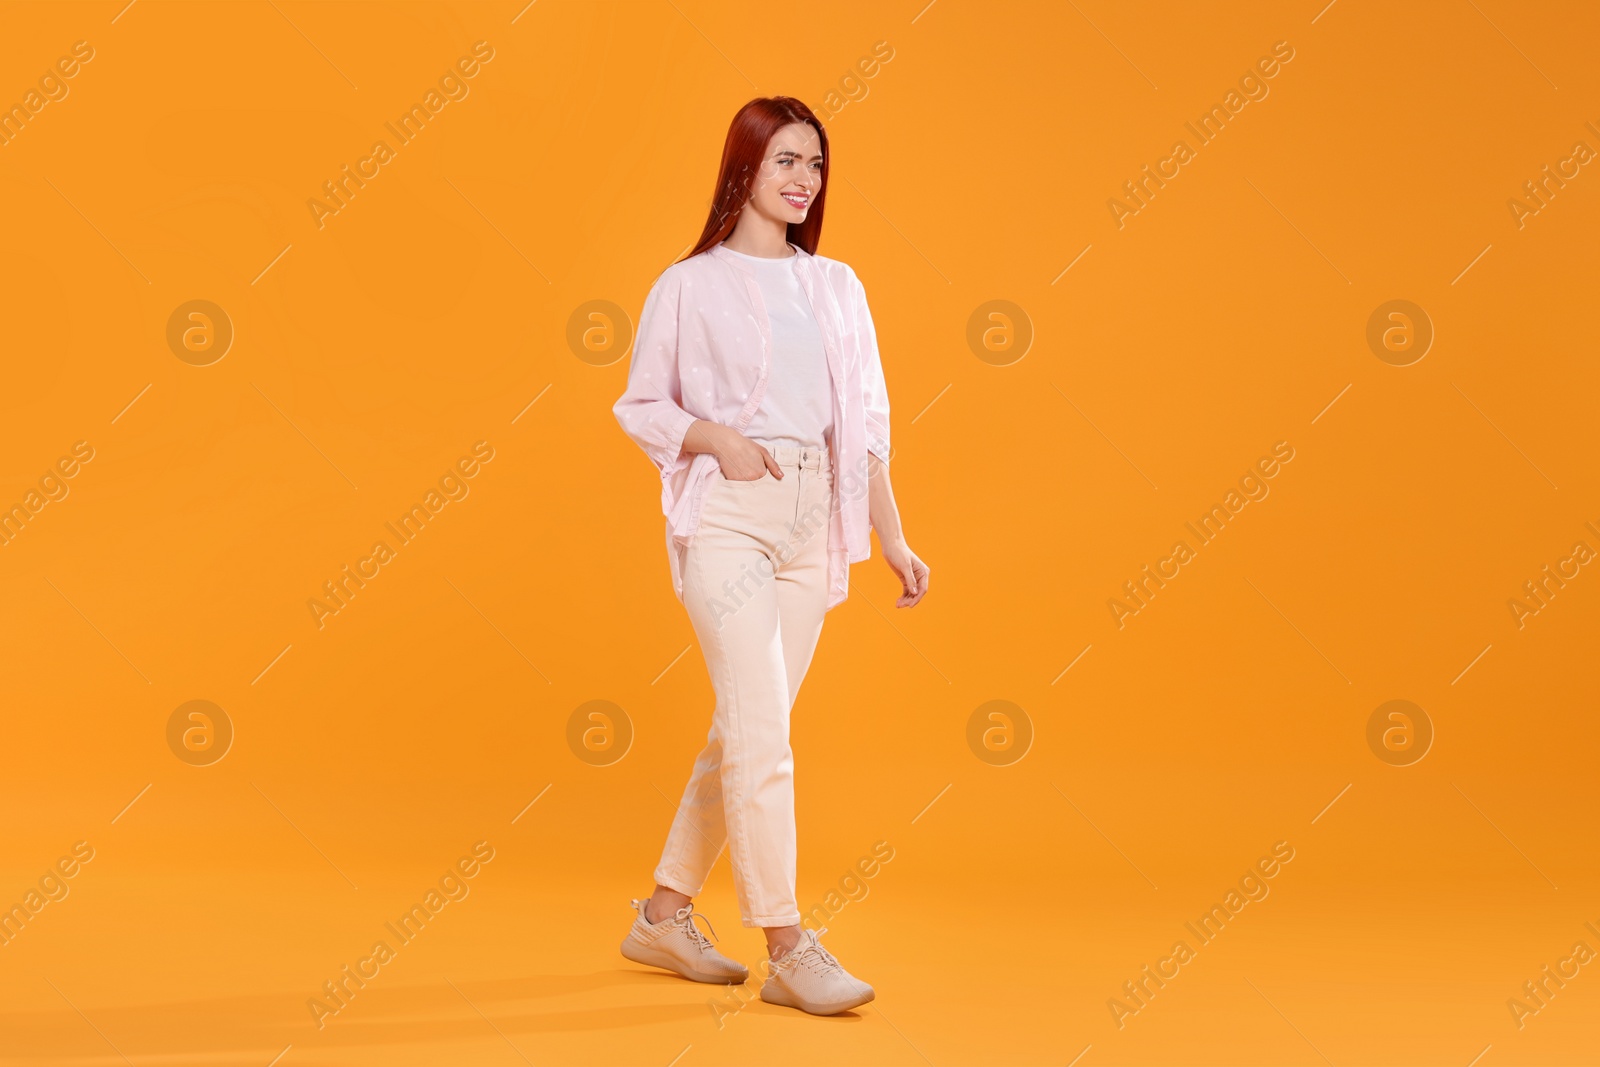 Photo of Happy woman with red dyed hair walking on orange background